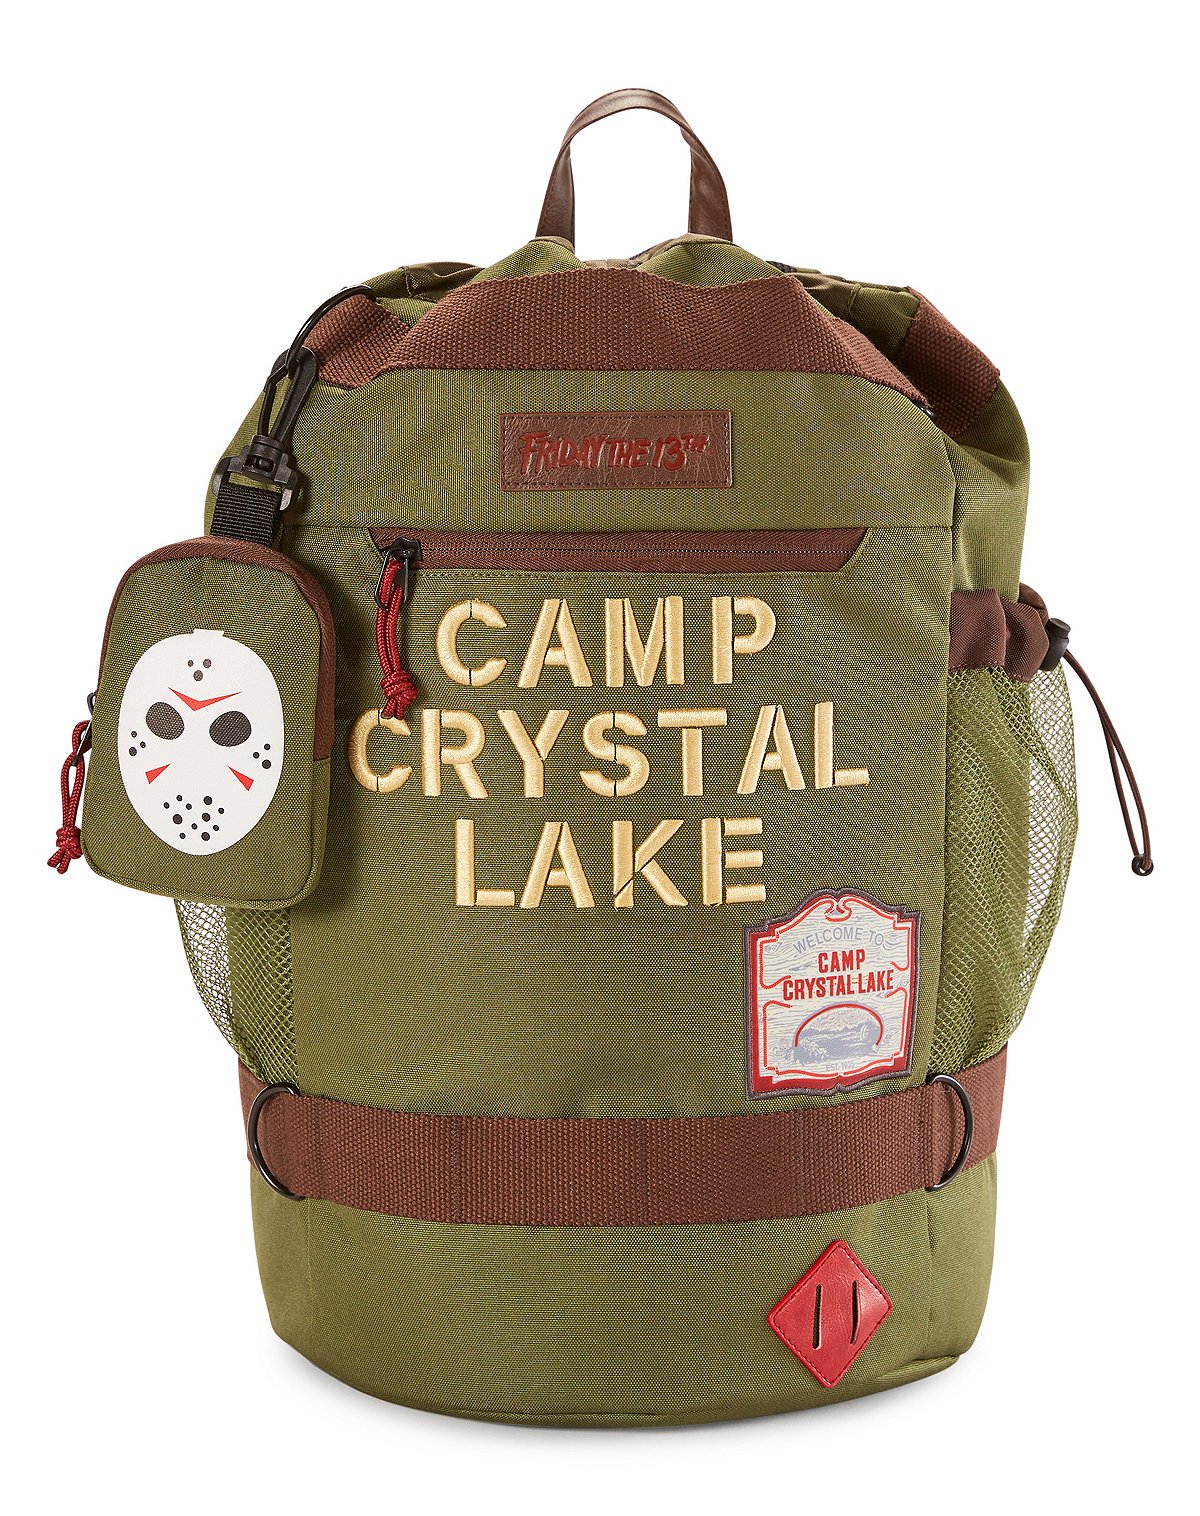 Camp Crystal Lake Backpack- Friday the 13th